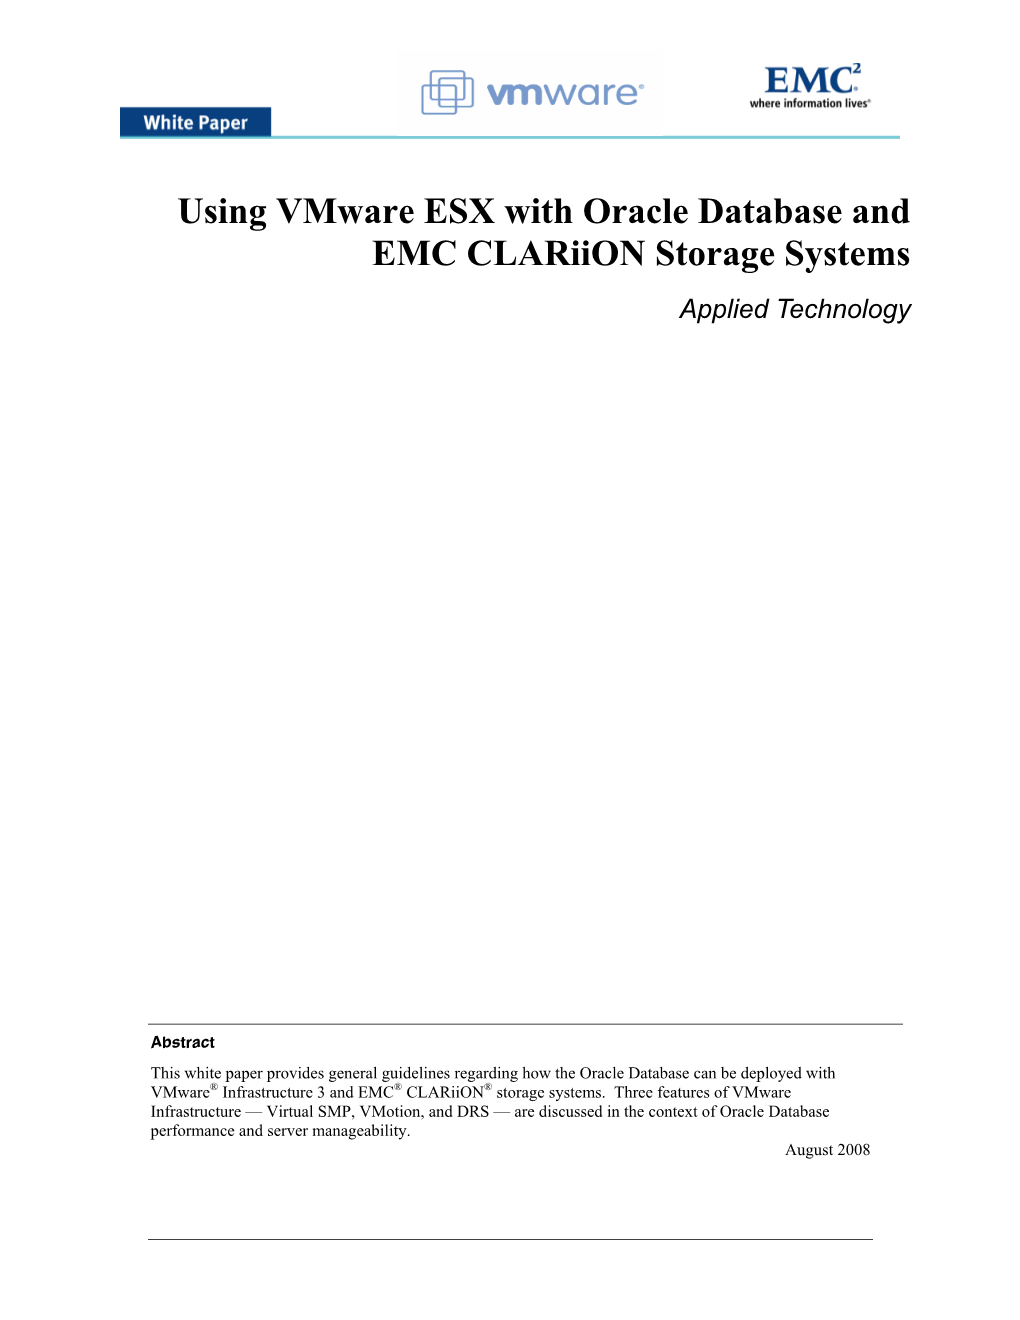 Using Vmware ESX with Oracle Database and EMC Clariion Storage Systems Applied Technology